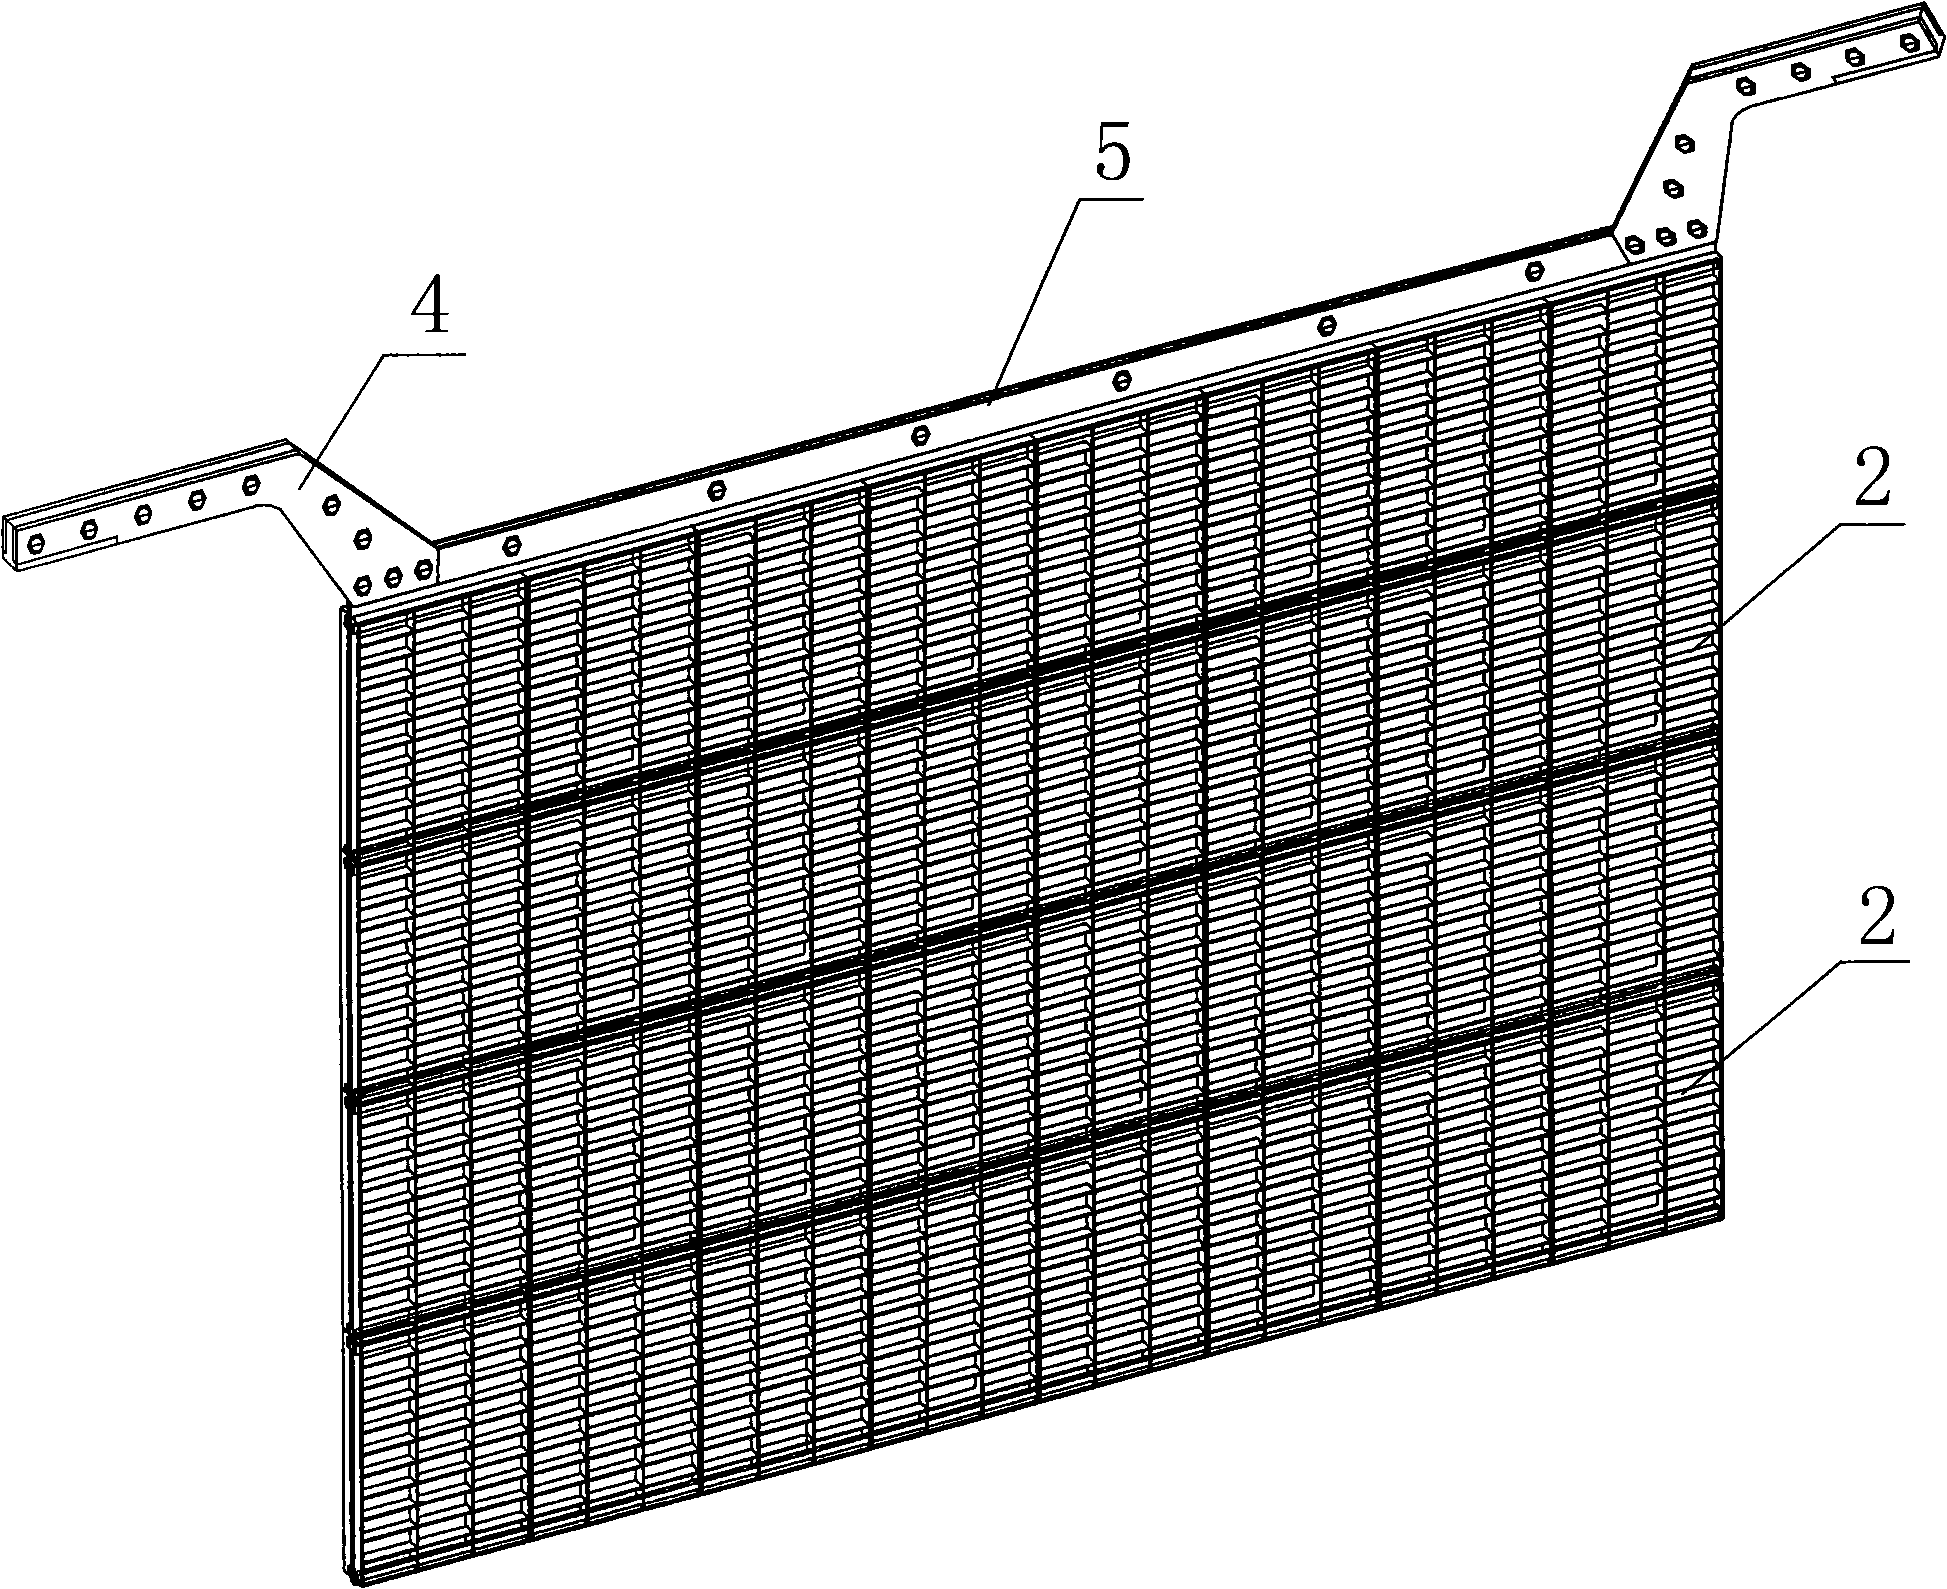 Combined electrolytic cathode plate